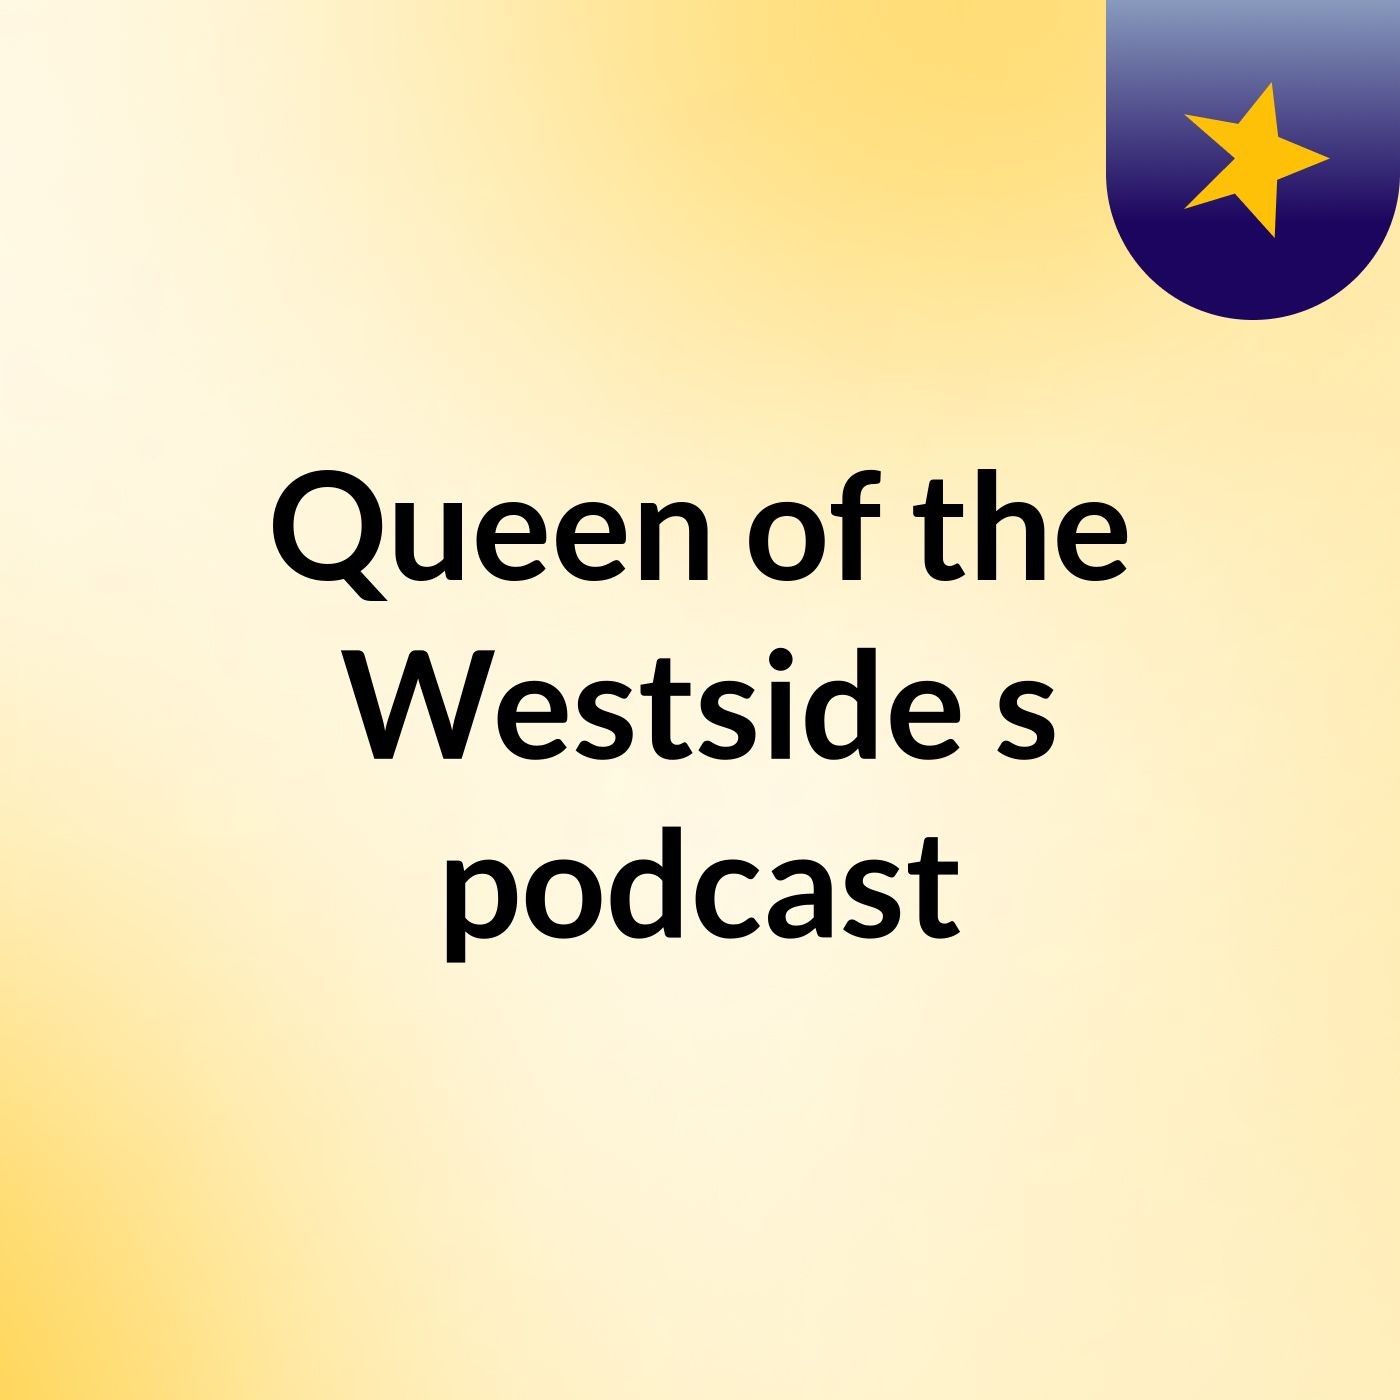 Queen of the Westside's podcast